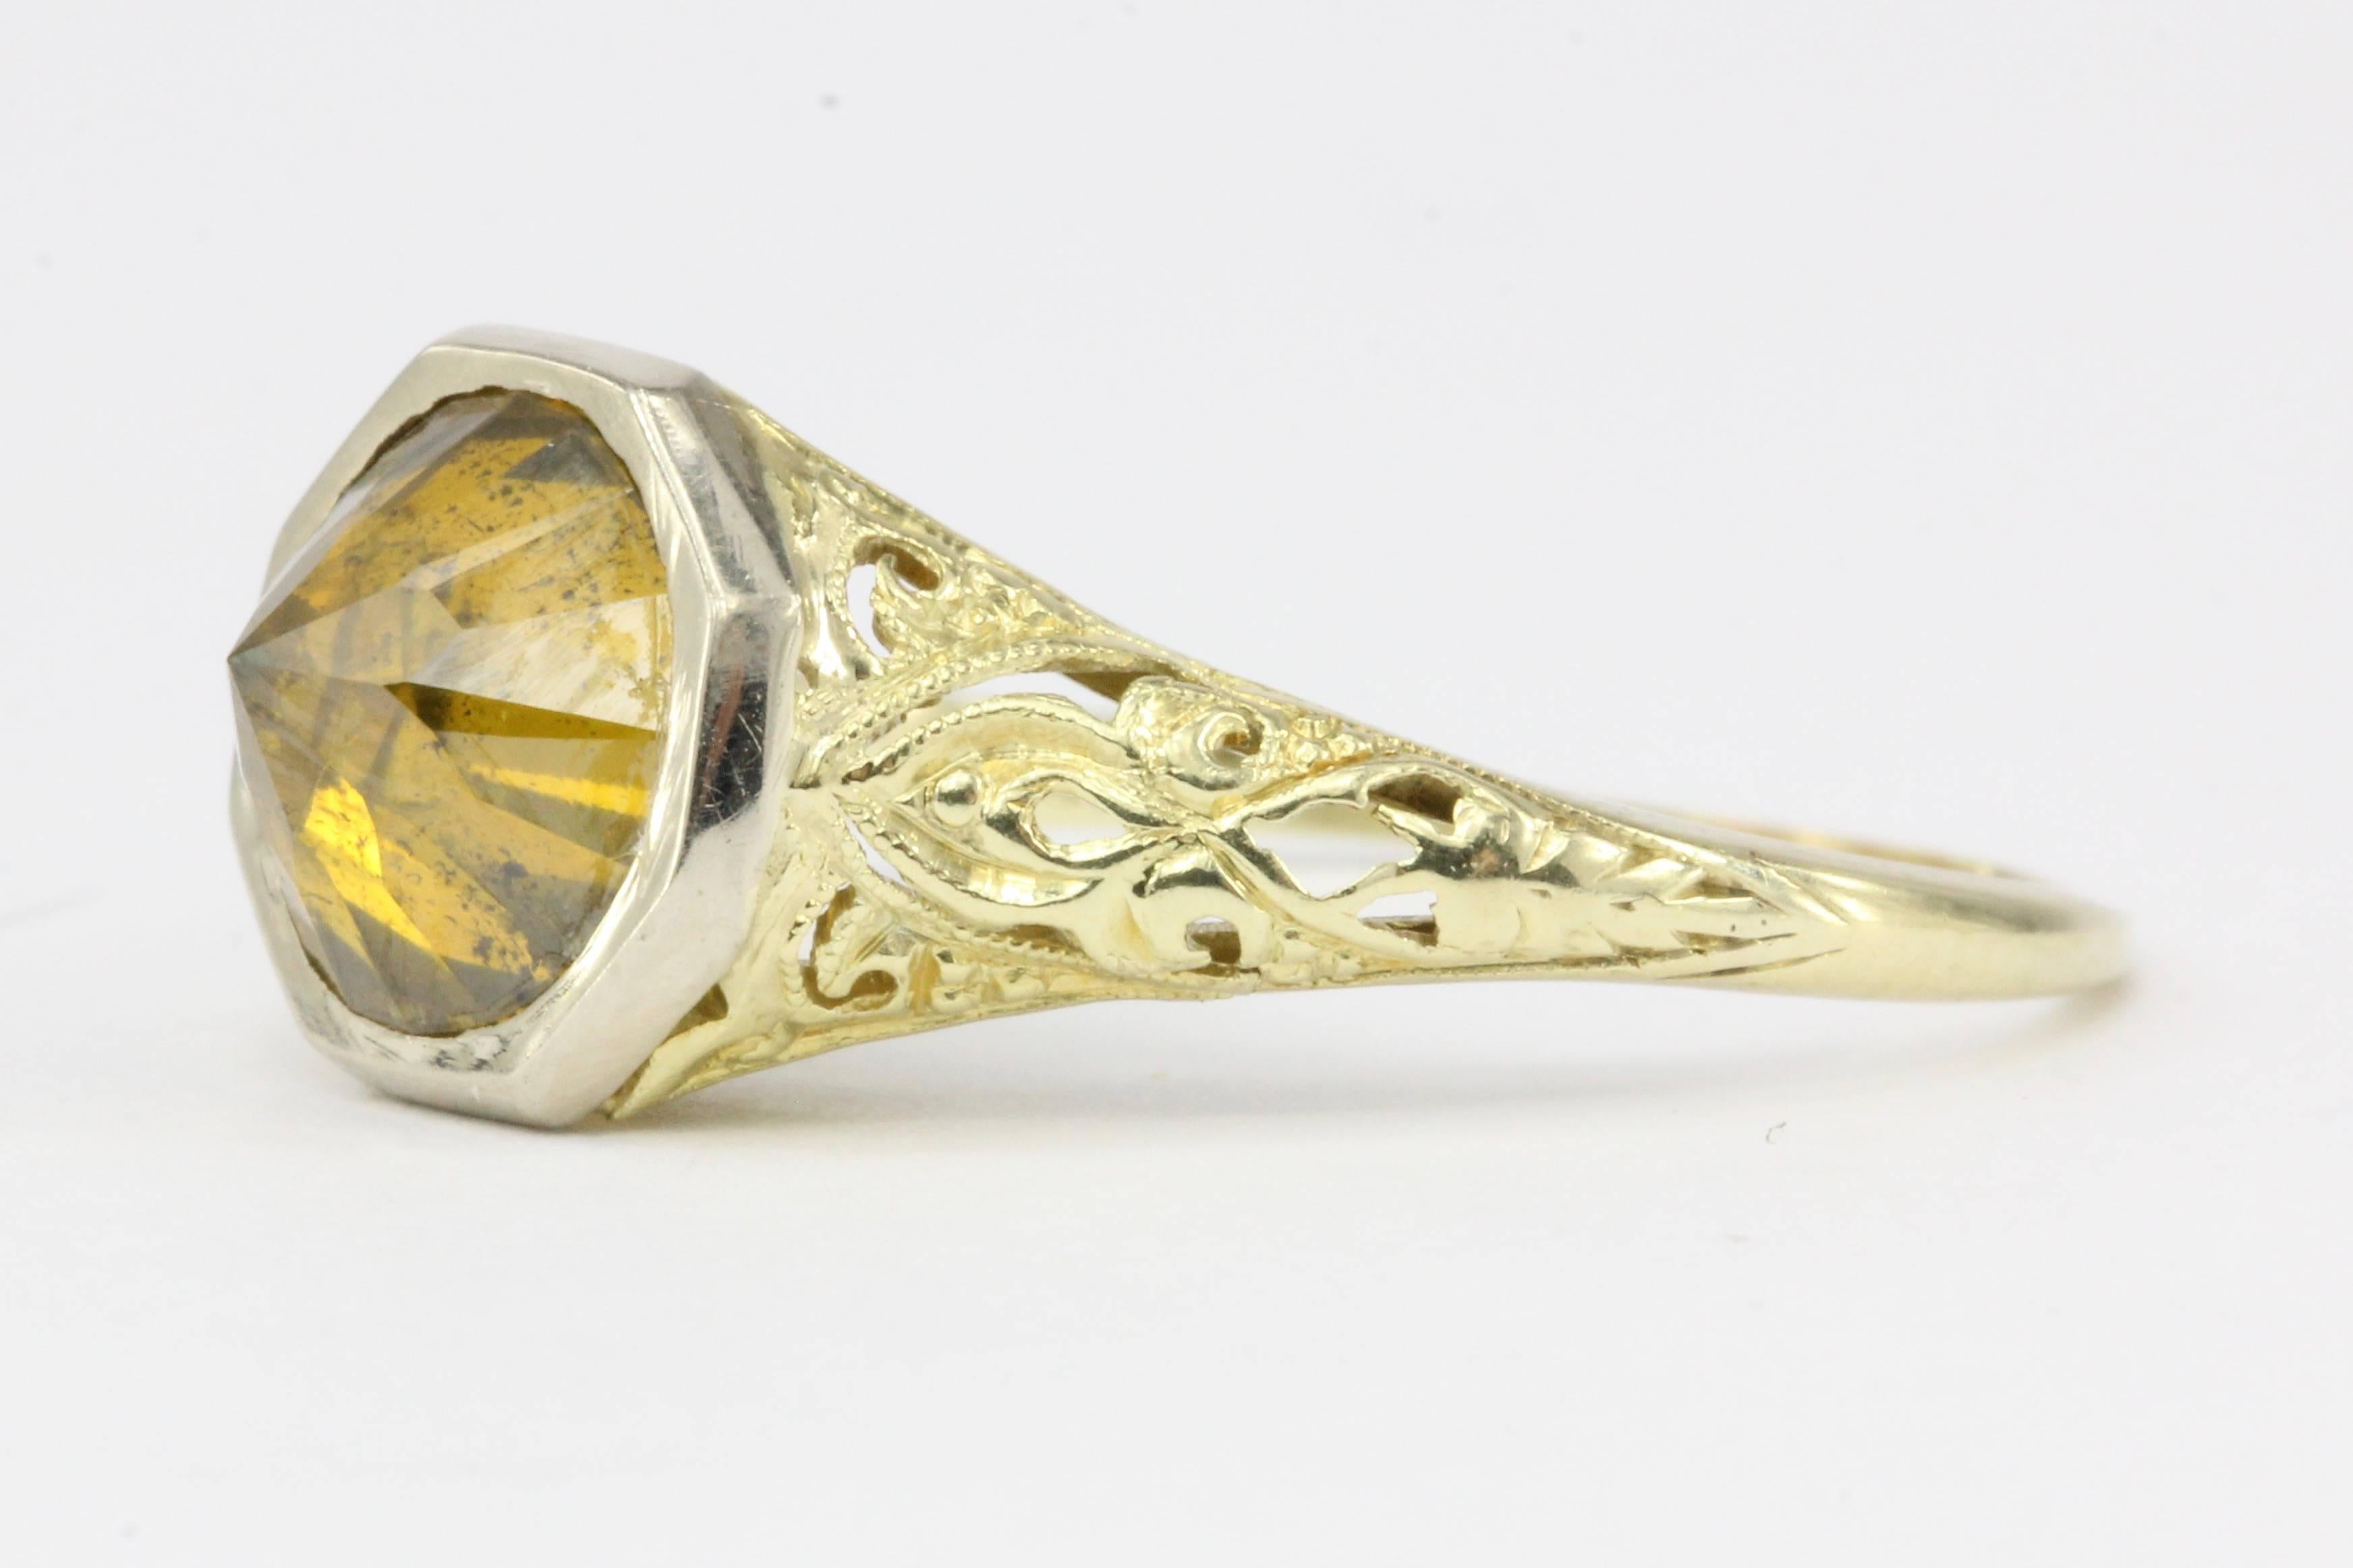 Era: Art Deco Setting, Modern Cut Stone

Composition: 14K Yellow Gold & Platinum 

Primary Stone: Diamond

Stone Carat: 2 Carat

Color: Fancy Yellow/Orange

Clarity: I2

Ring Face: 9.75mm x 9.4mm wide

Ring Size: 8

Ring Weight: 2.3 grams

Ring